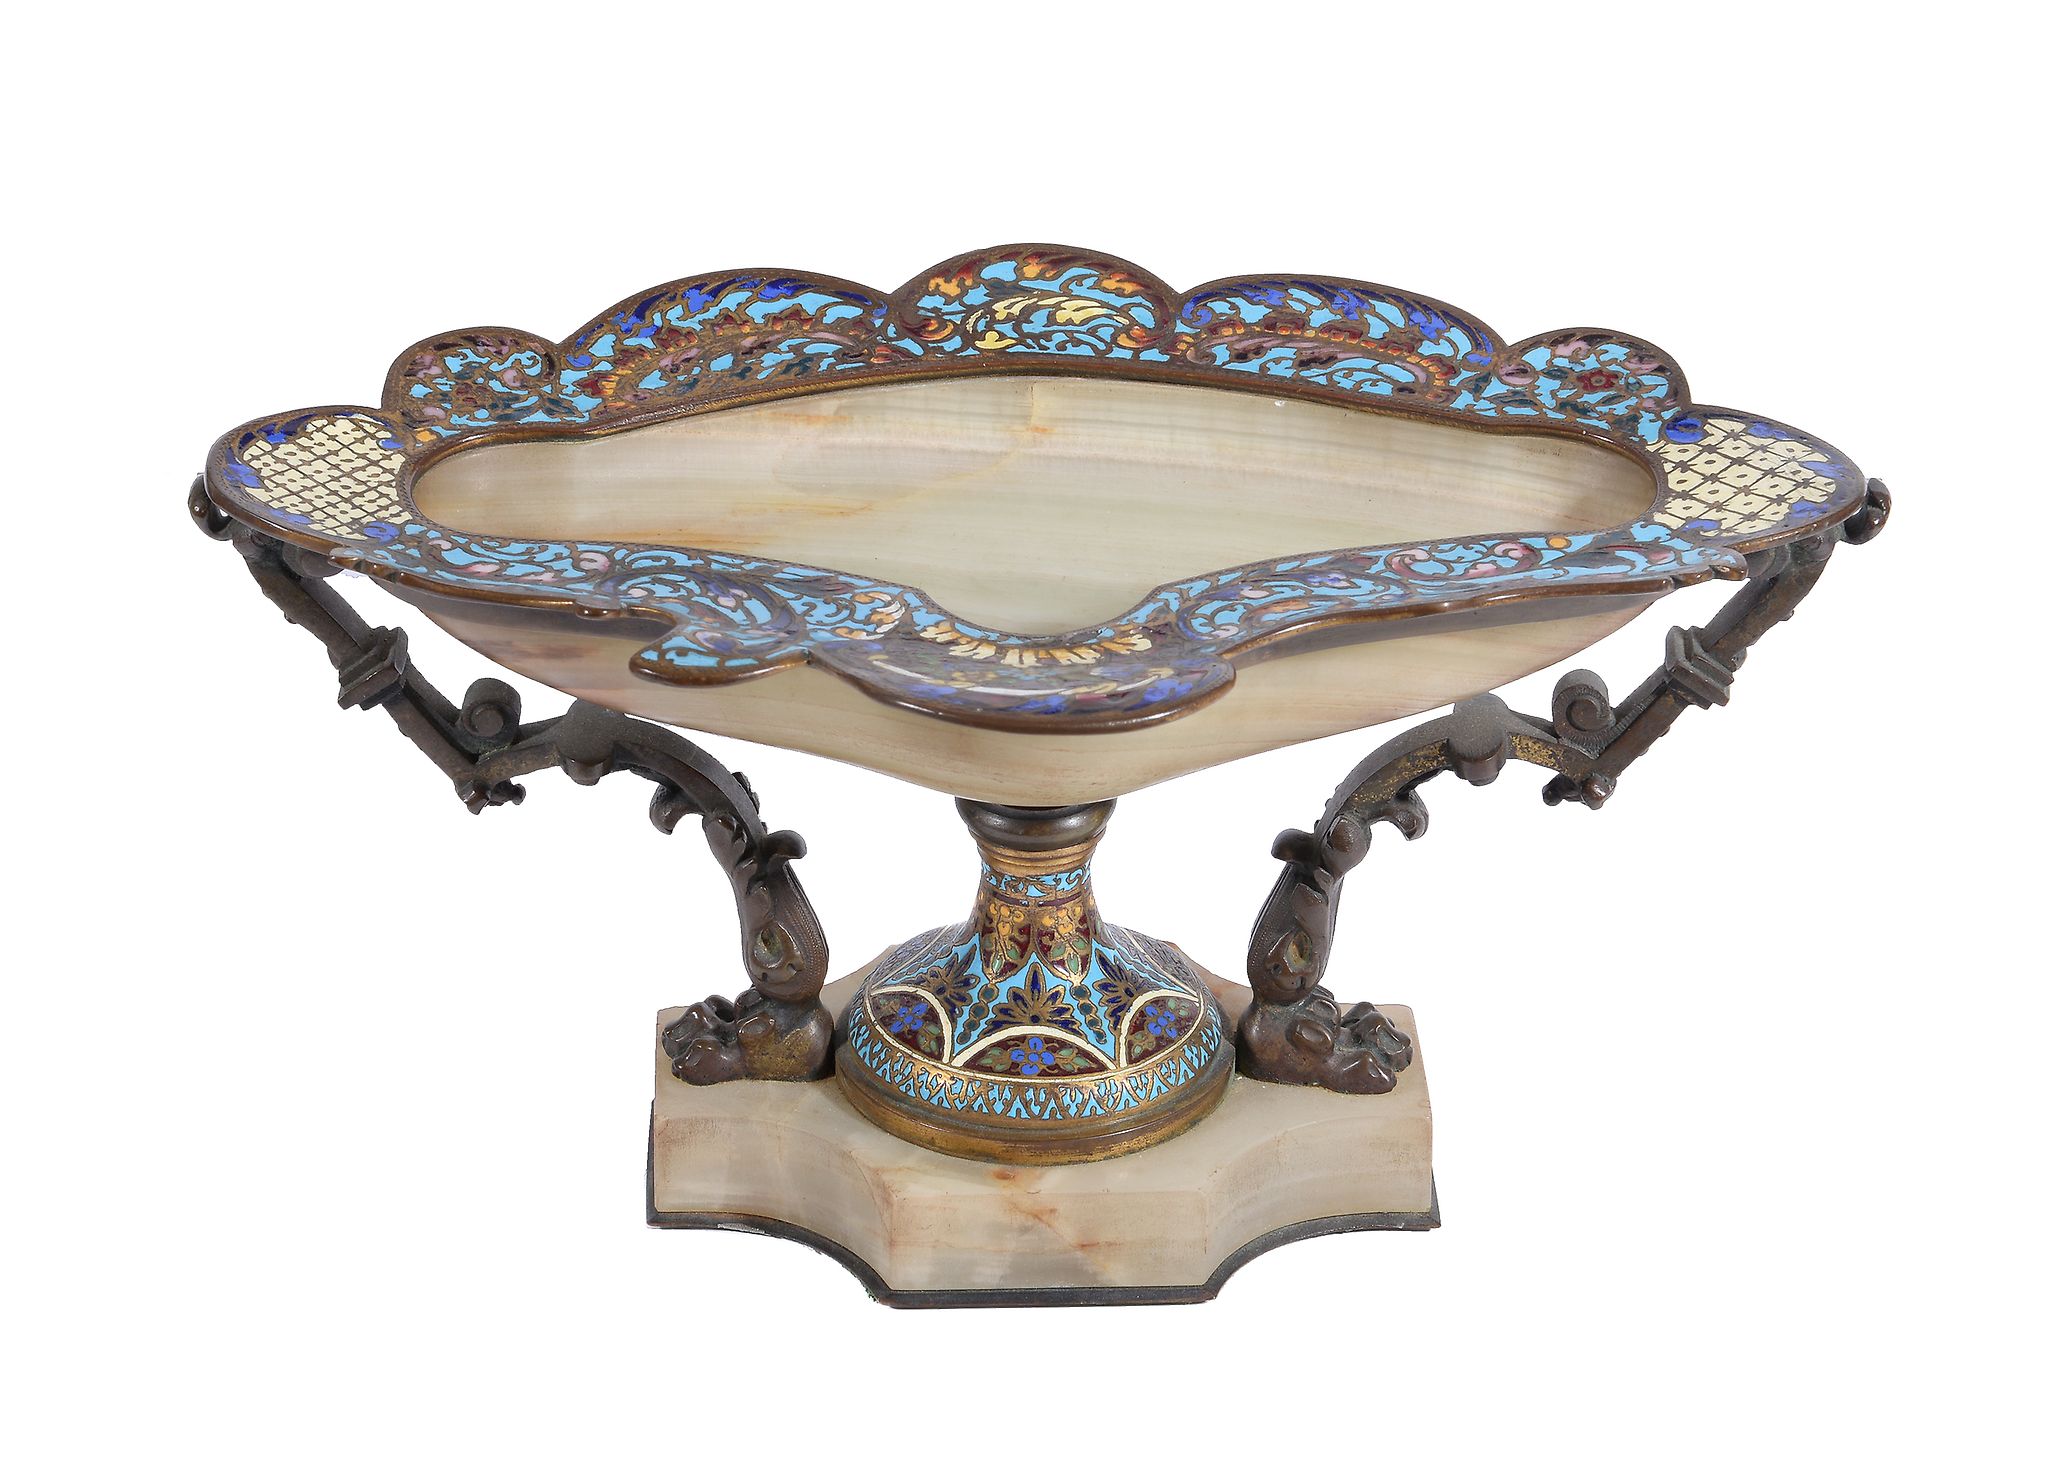 A French onyx, bronze and champleve enamel stand, circa 1900, the dished top with foliate and